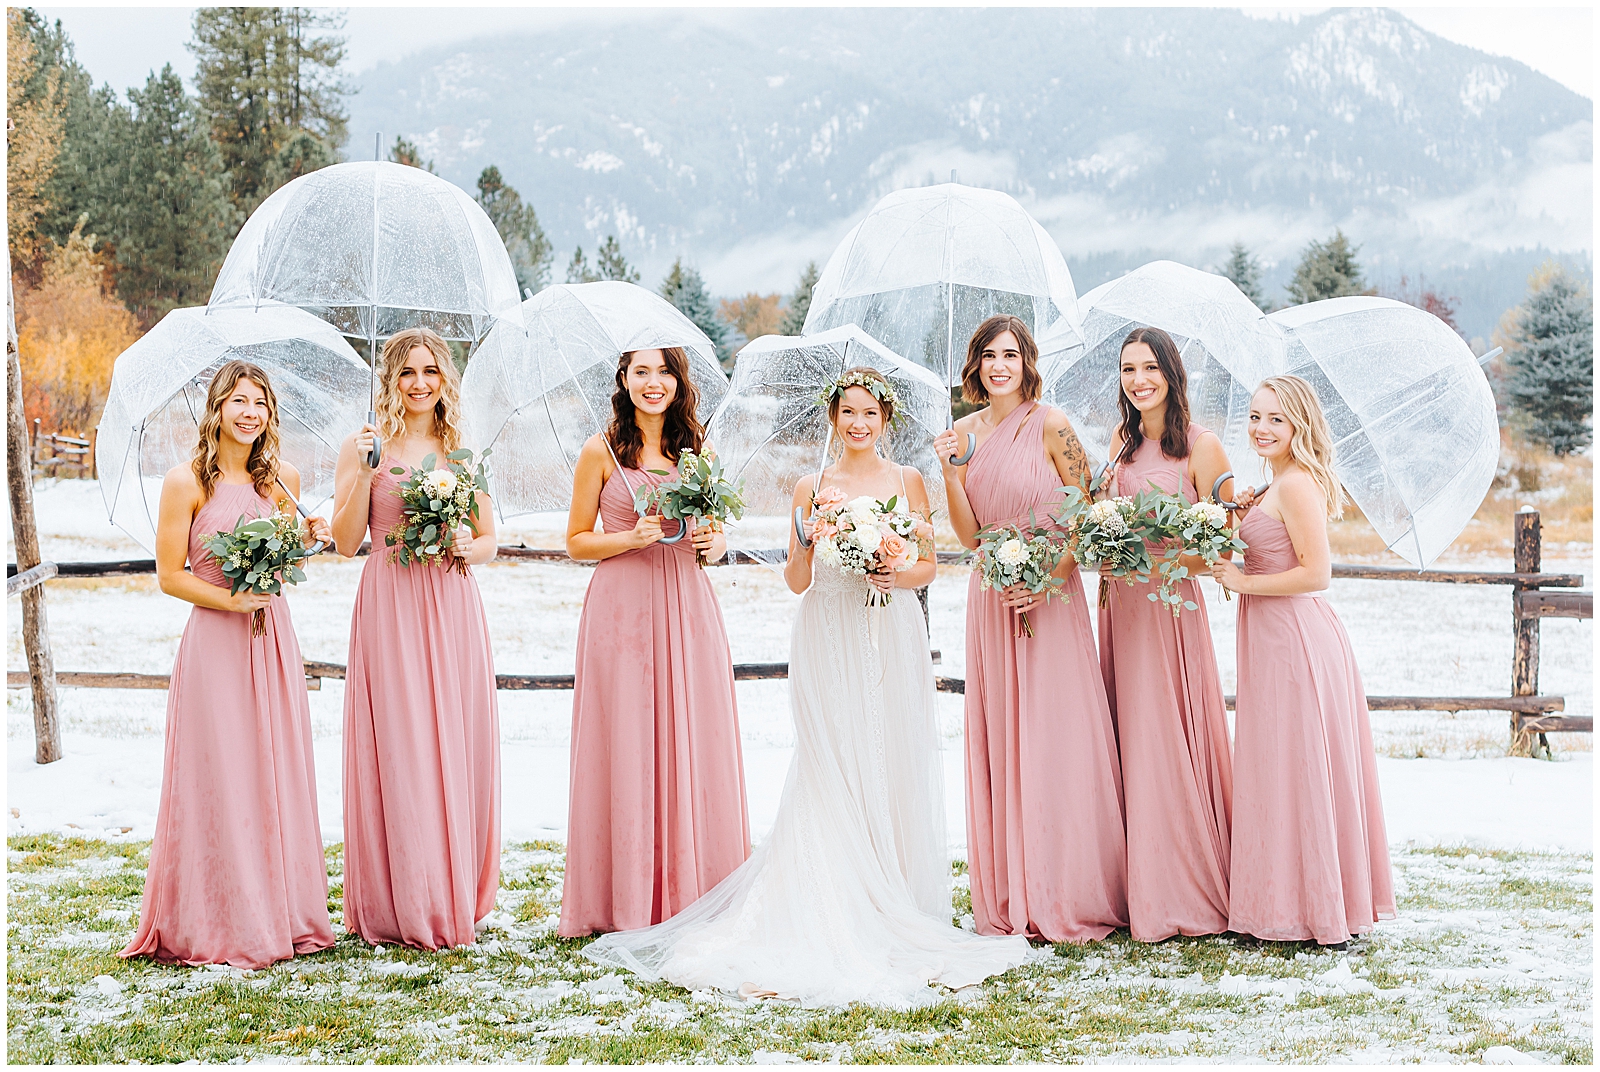 Dusty Rose Bridesmaids Dresses at Rainy Wedding with clear umbrellas